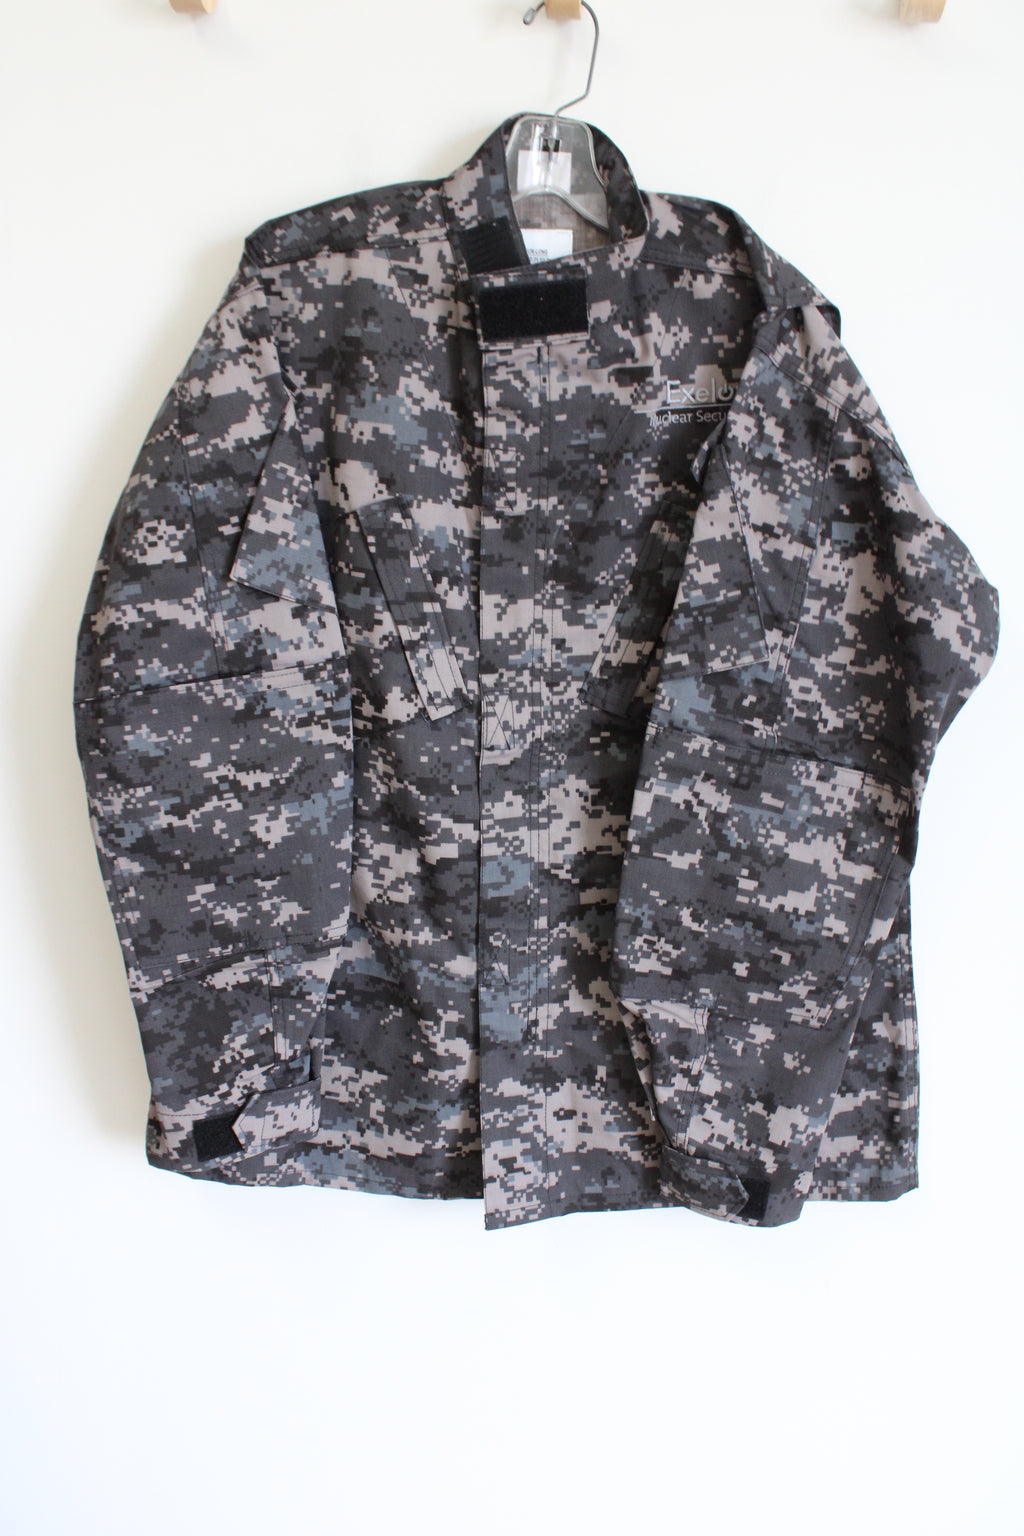 Propper Exelon Nuclear Security Tactical Military Jacket | M Long